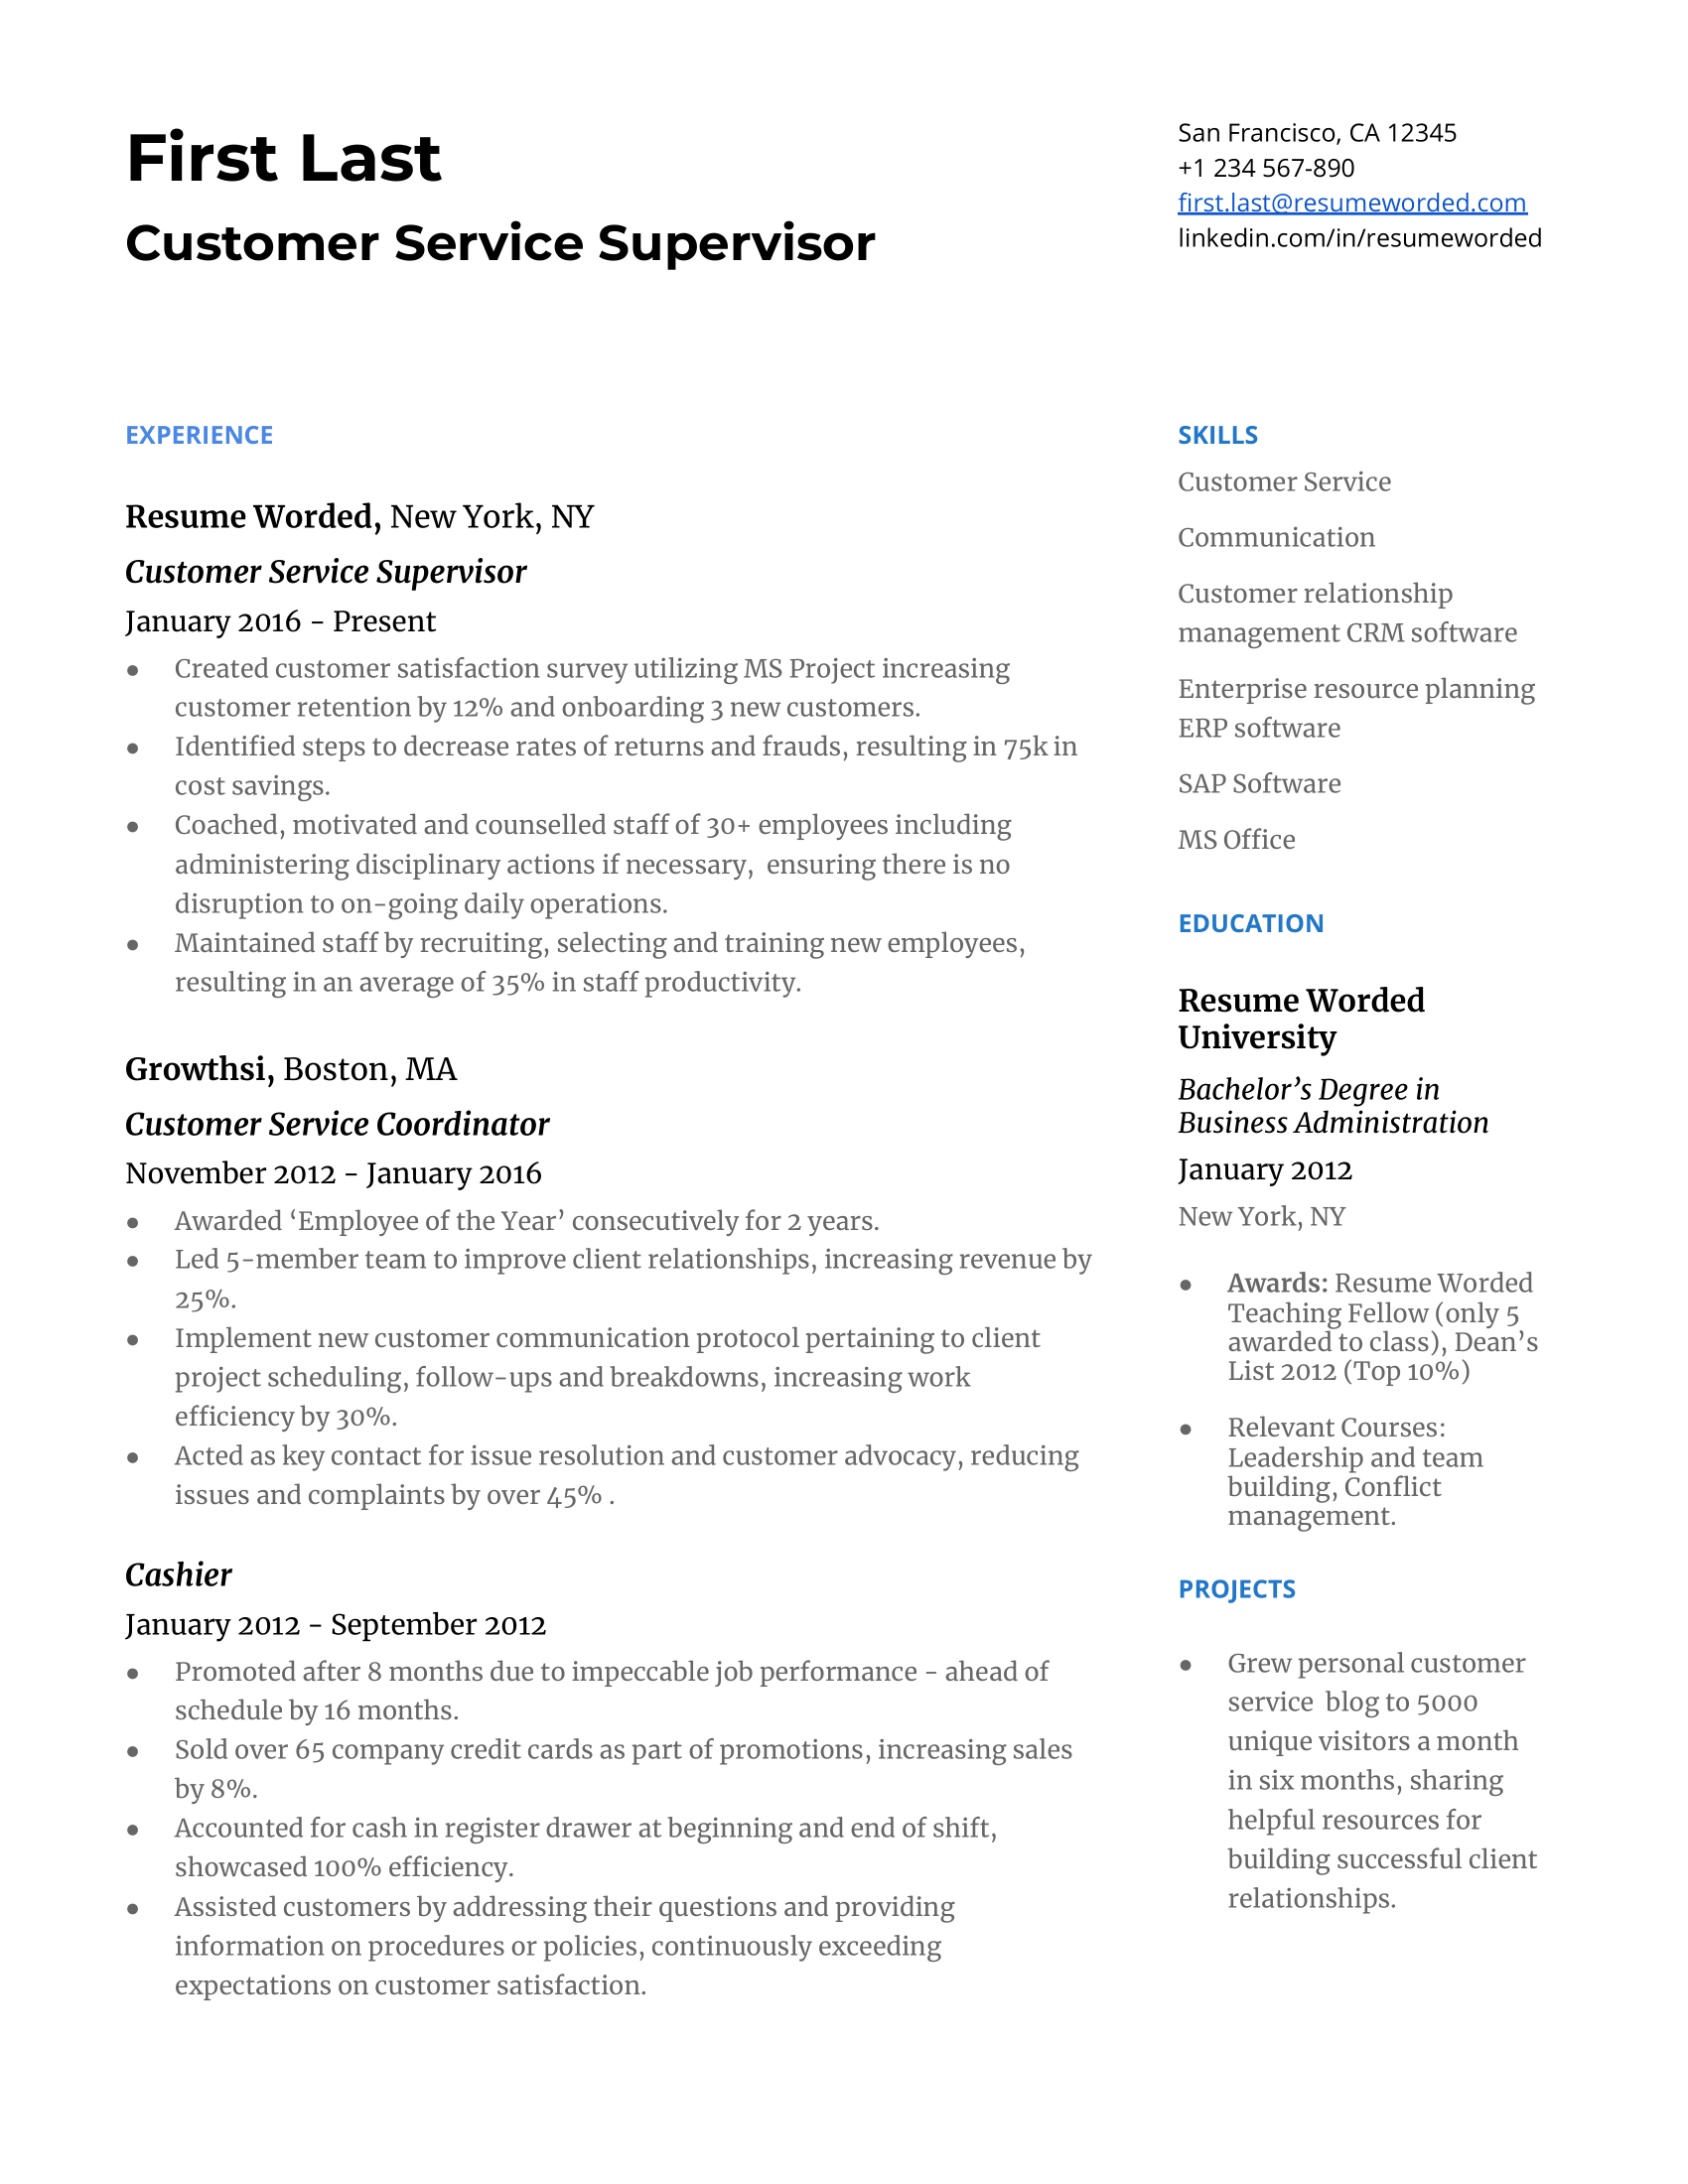 A resume for a customer service supervisor with a degree in business admin and experience as a customer service coordinator.